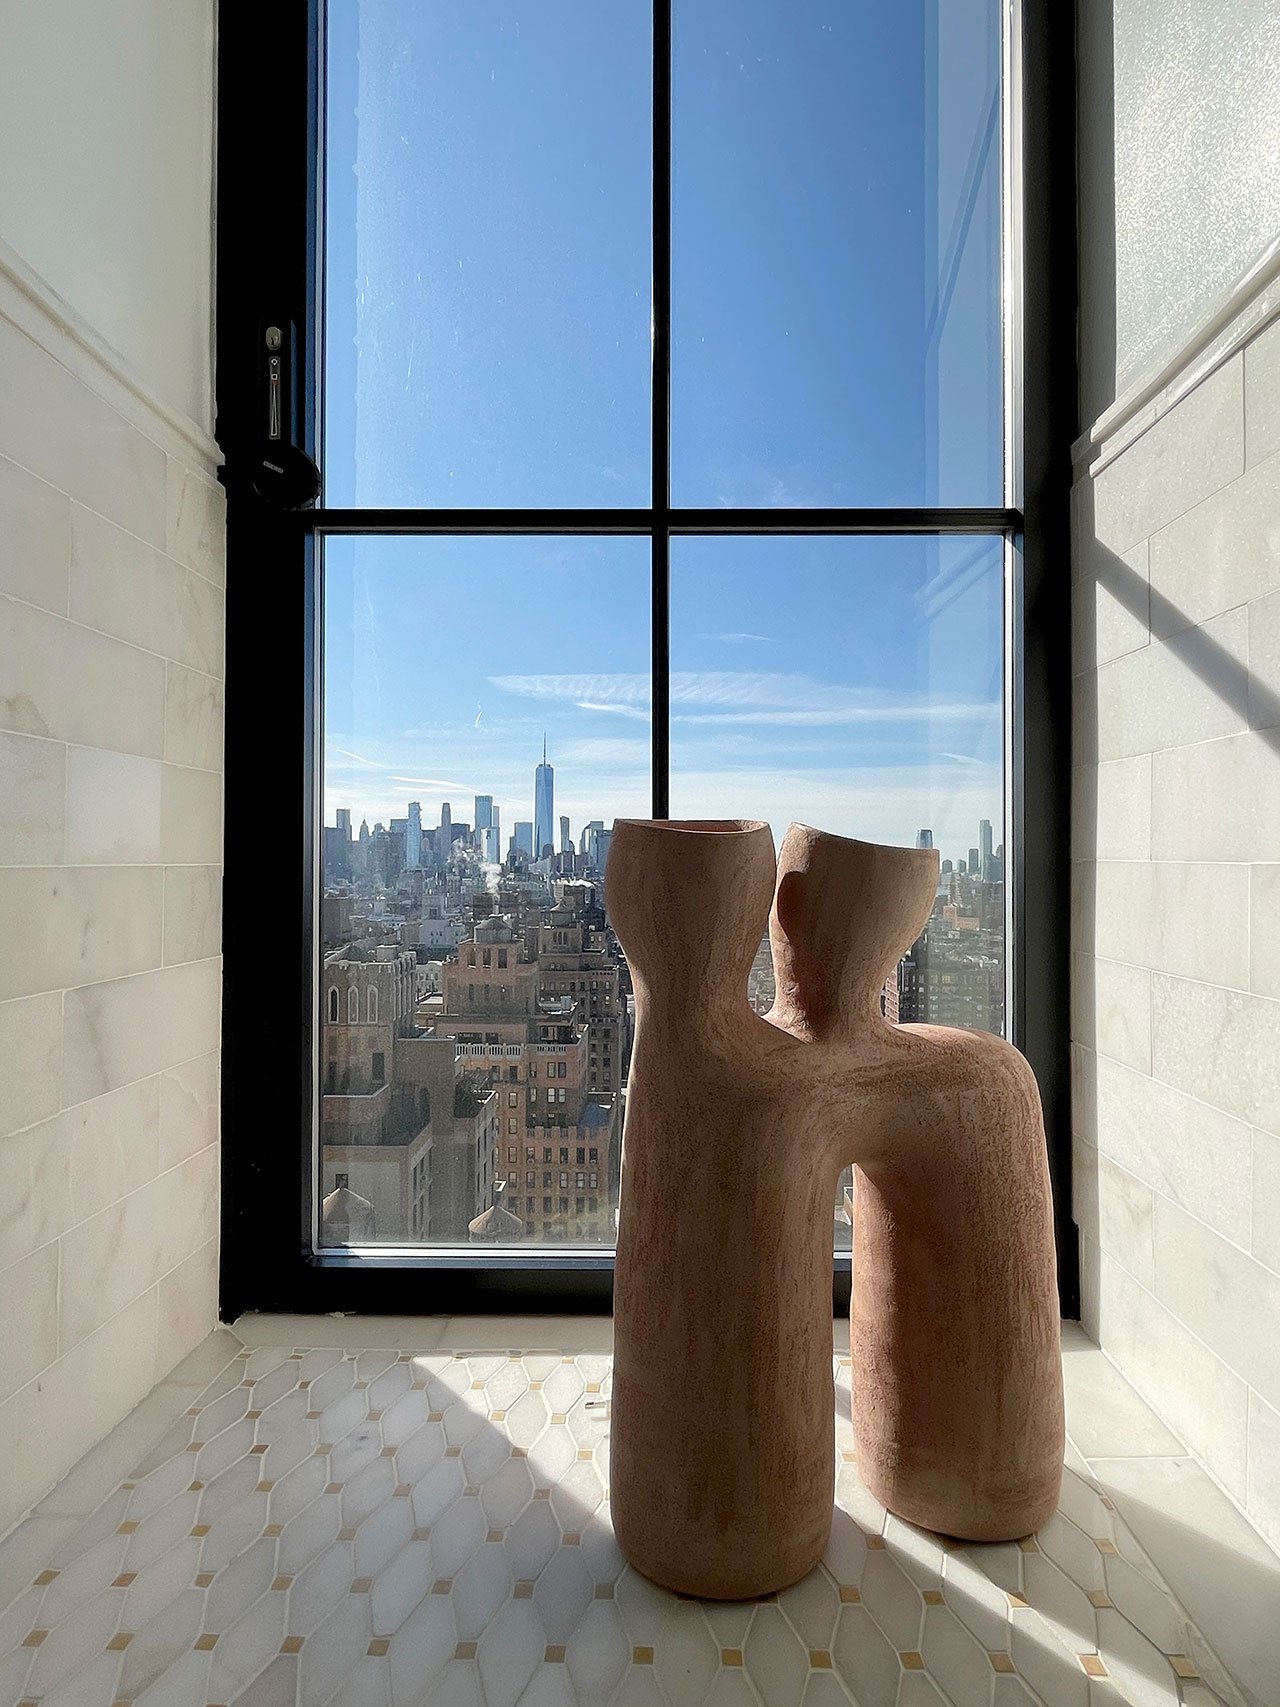 Galerie Philia at Walker Tower, Chelsea, New York. Courtesy of Galerie Philia.
Featured:
Elisa Uberti, Opéra table lamp. Pink Stoneware. 55 x 36 x 17 cm.